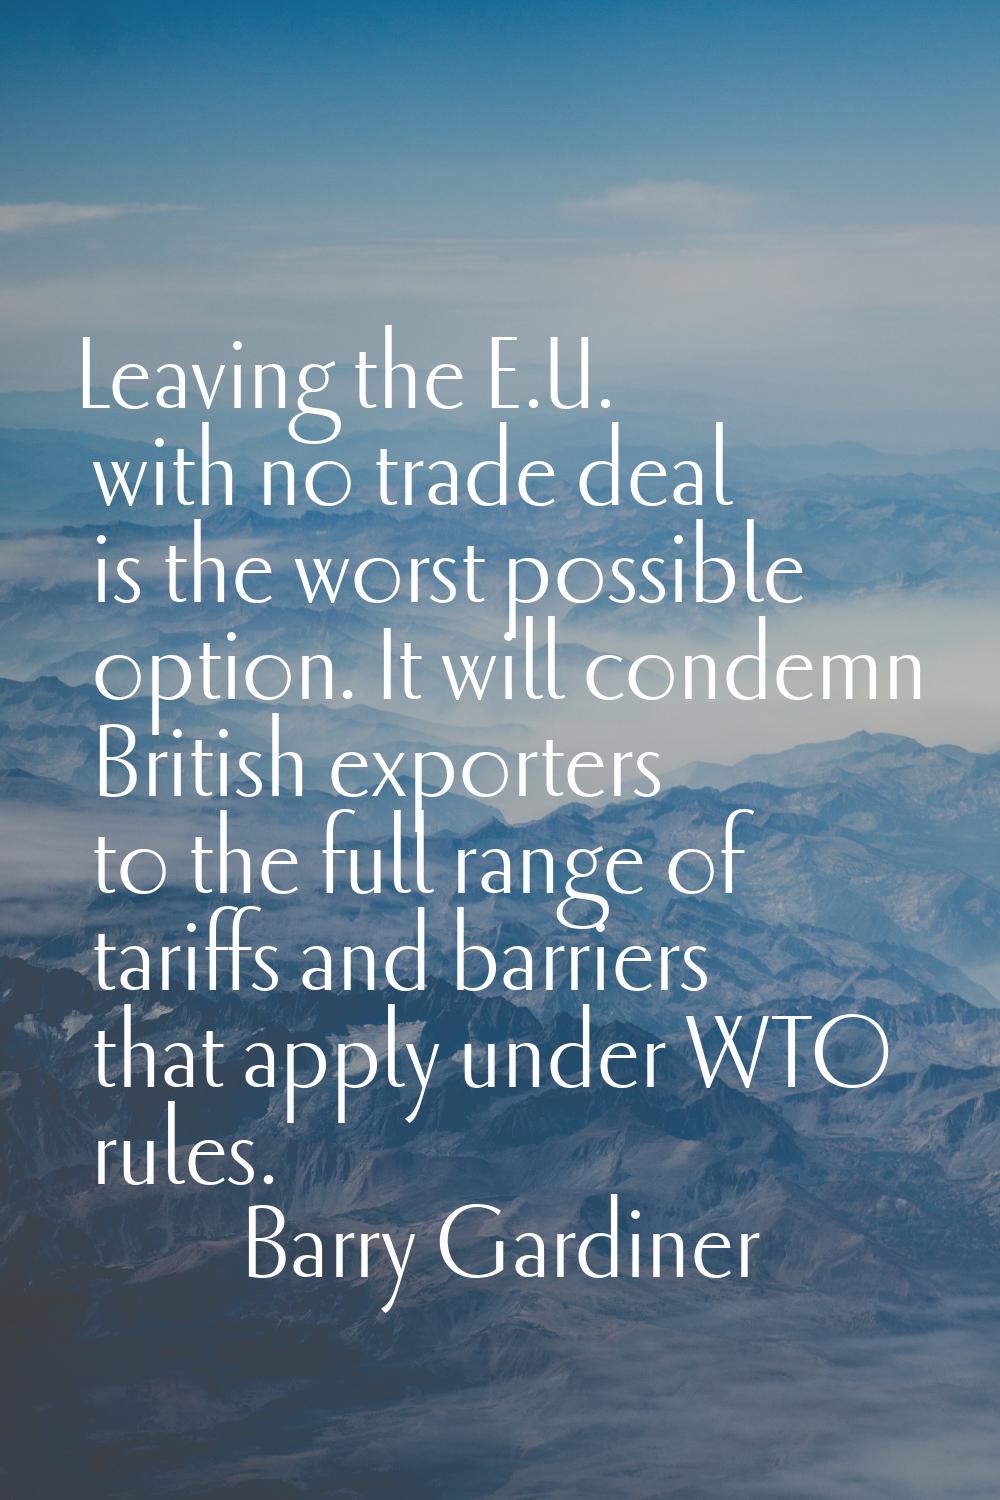 Leaving the E.U. with no trade deal is the worst possible option. It will condemn British exporters